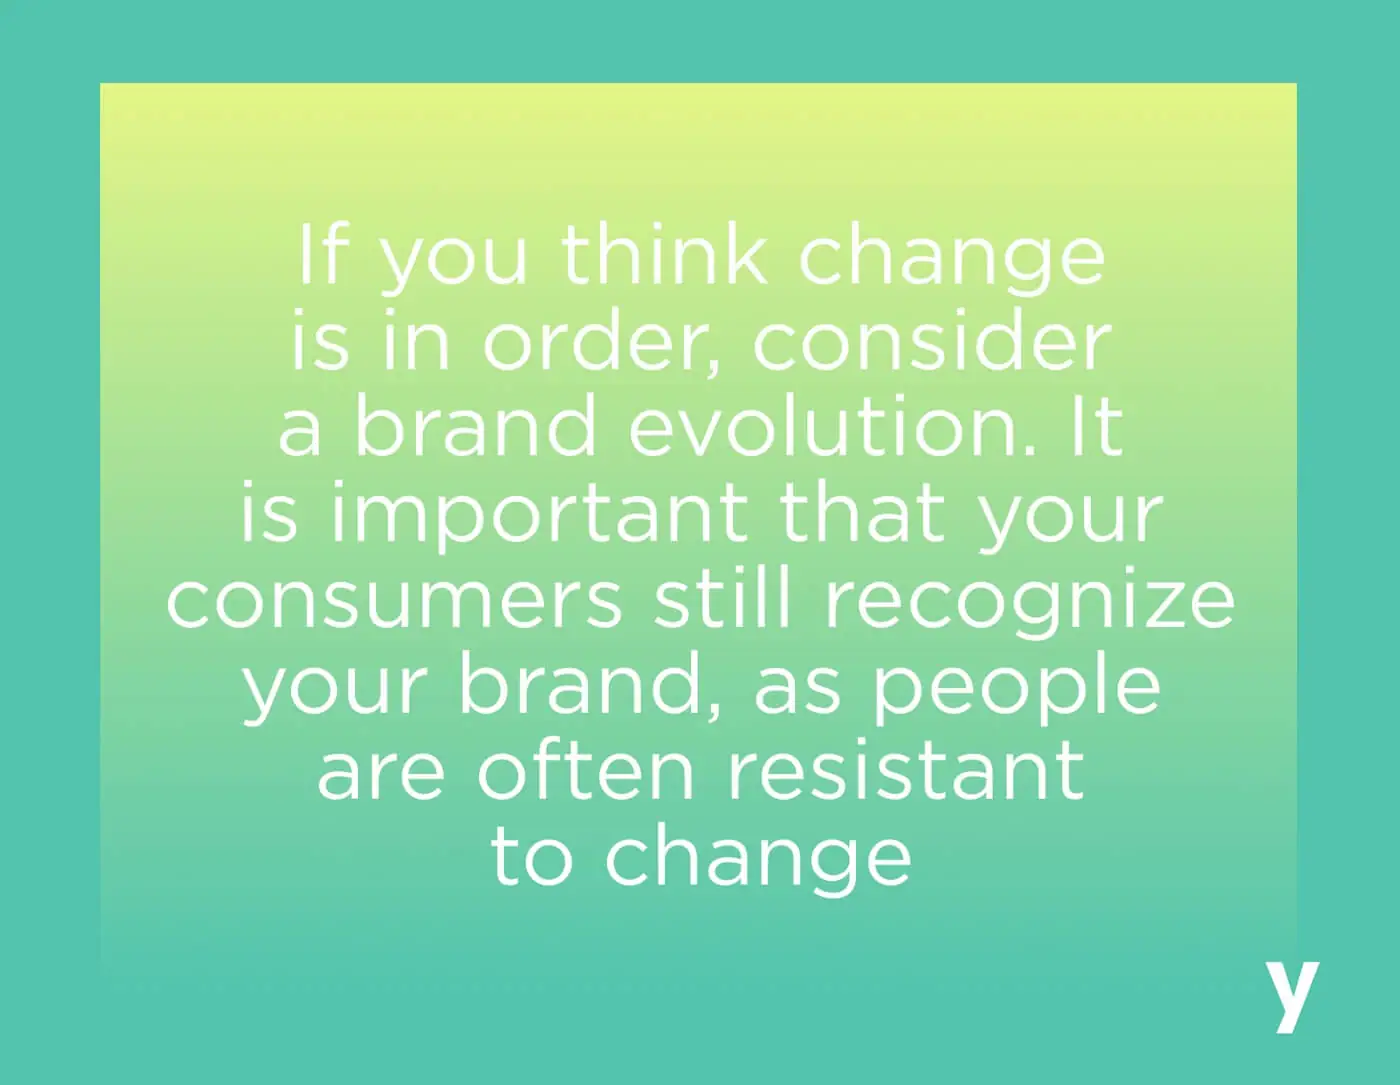 If you think change is in order, consider brand evolution.